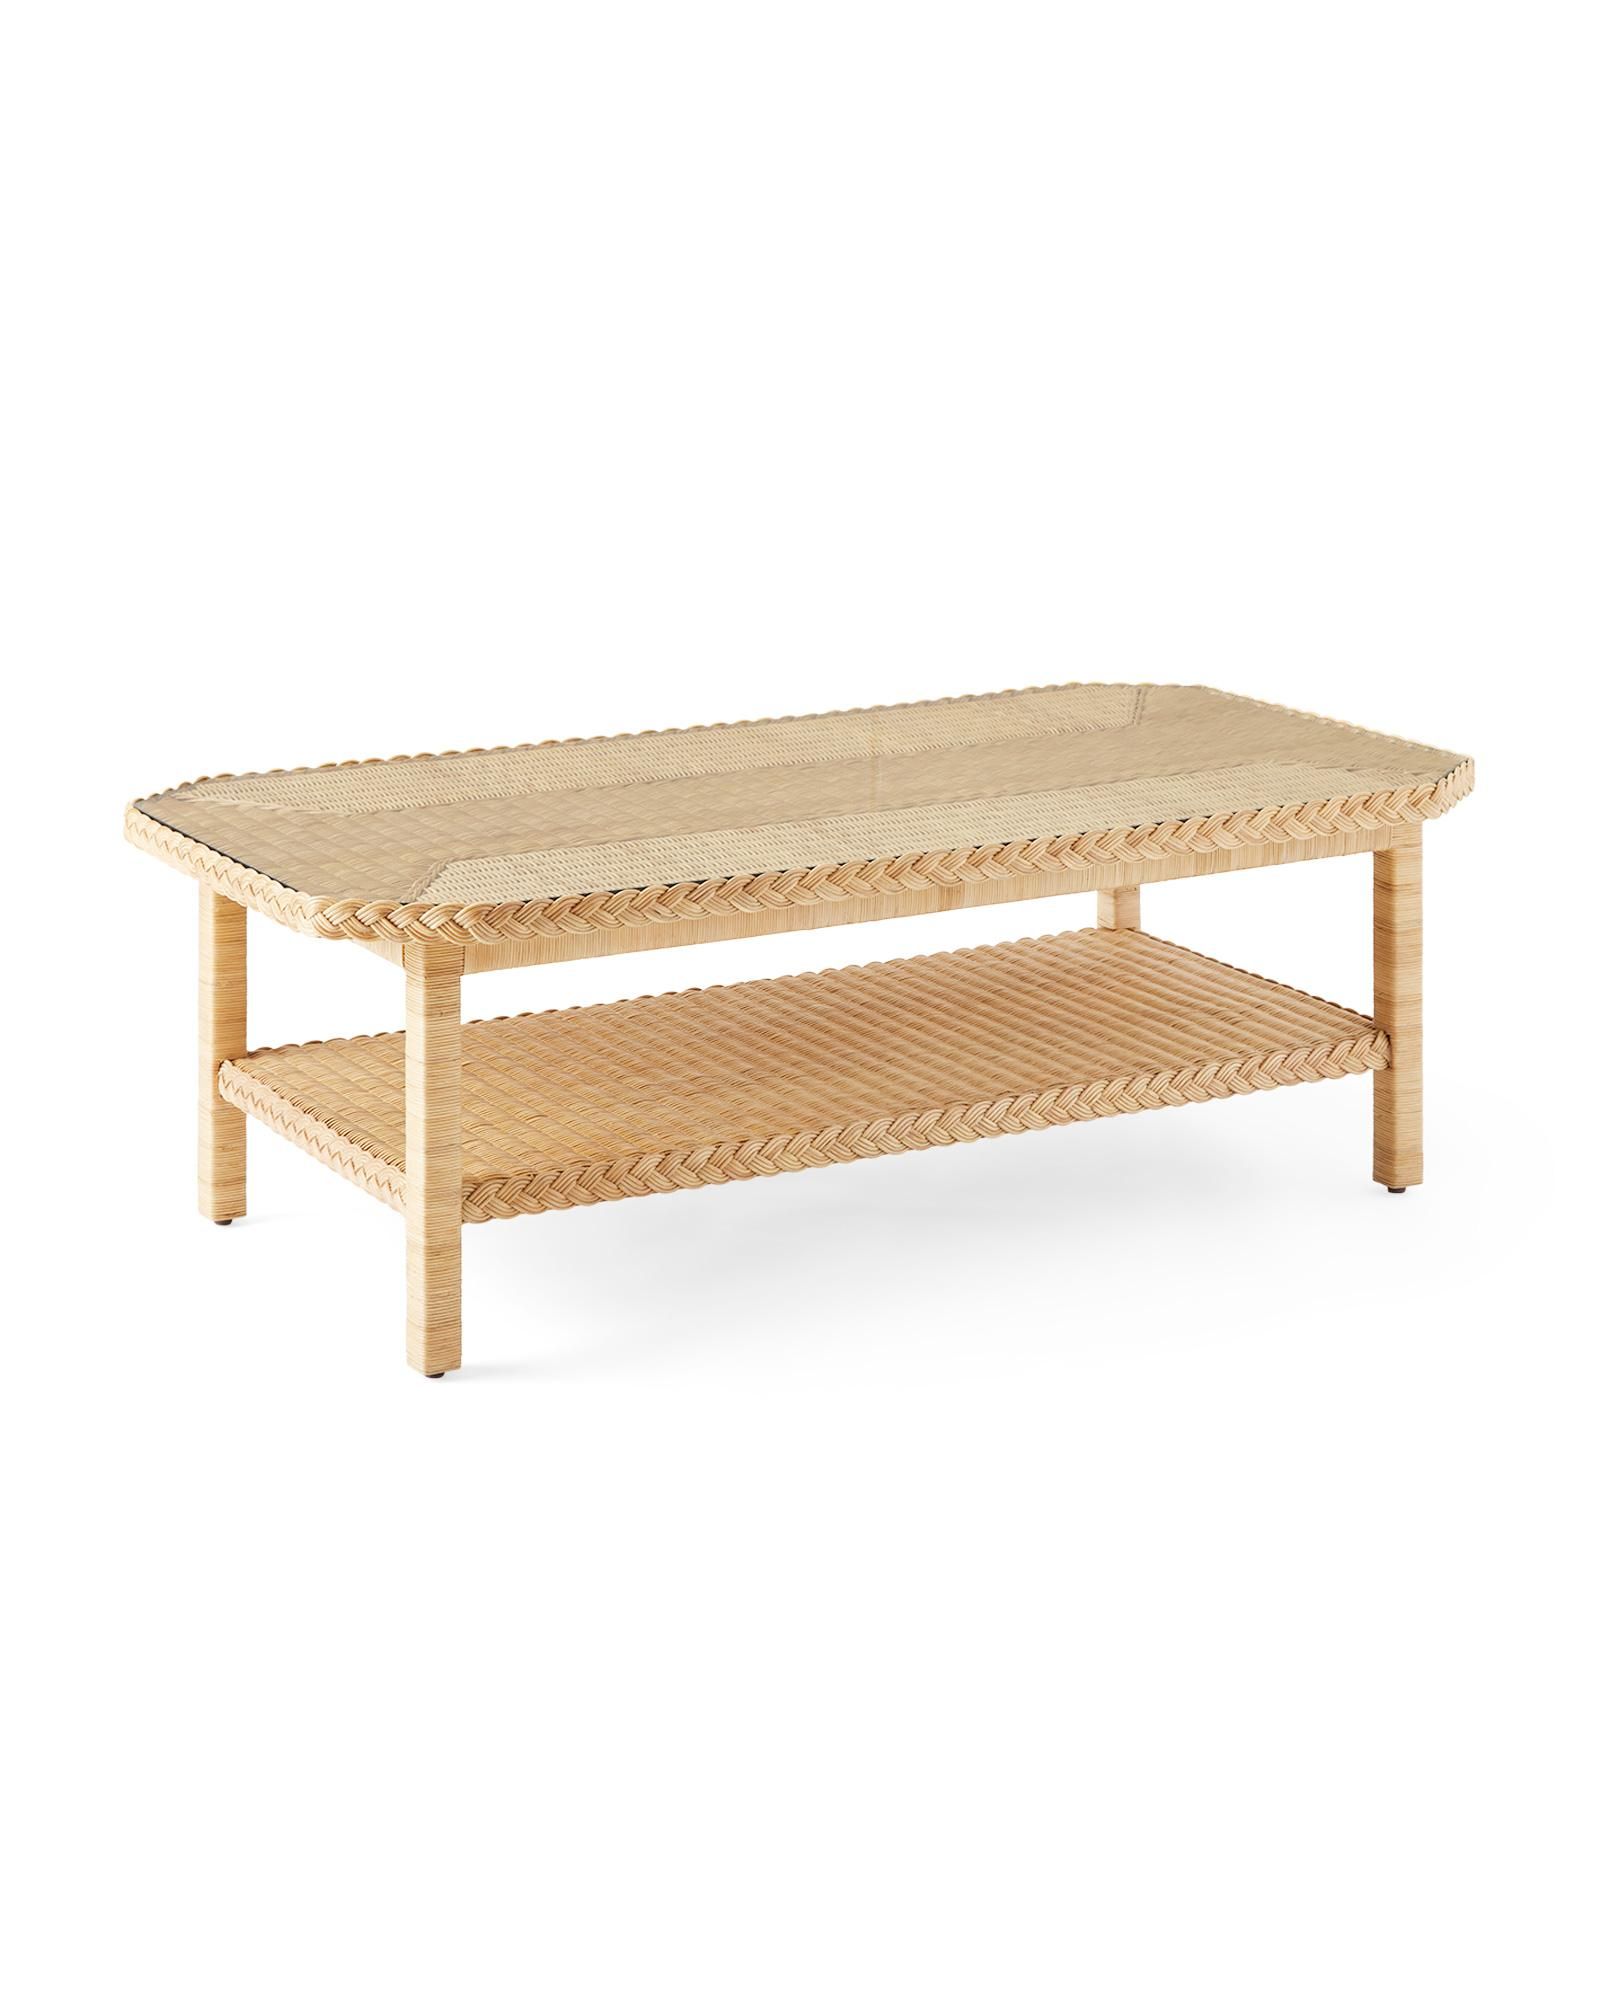 Hammonds Coffee Table | Serena and Lily